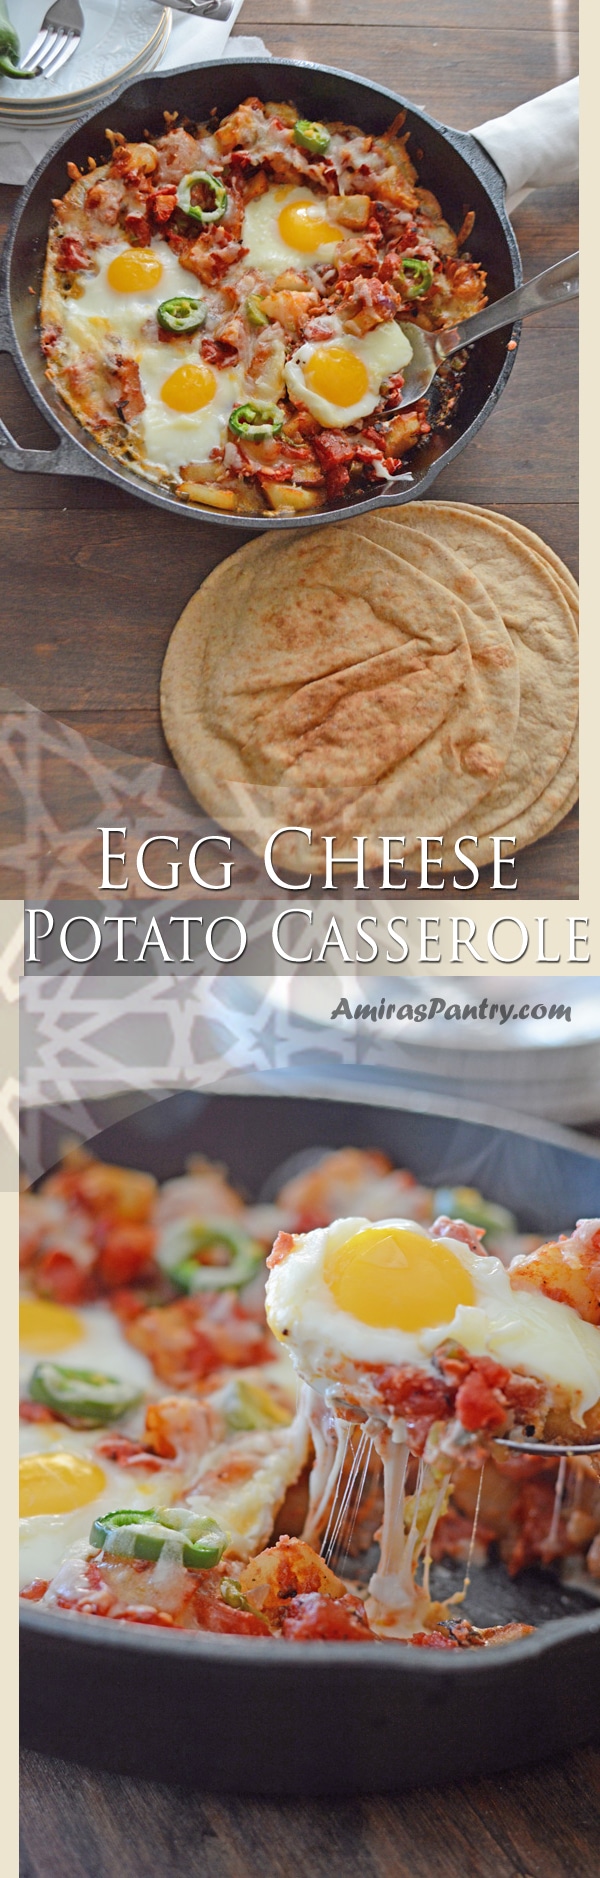 An infograph for Egg cheese and potato casserole